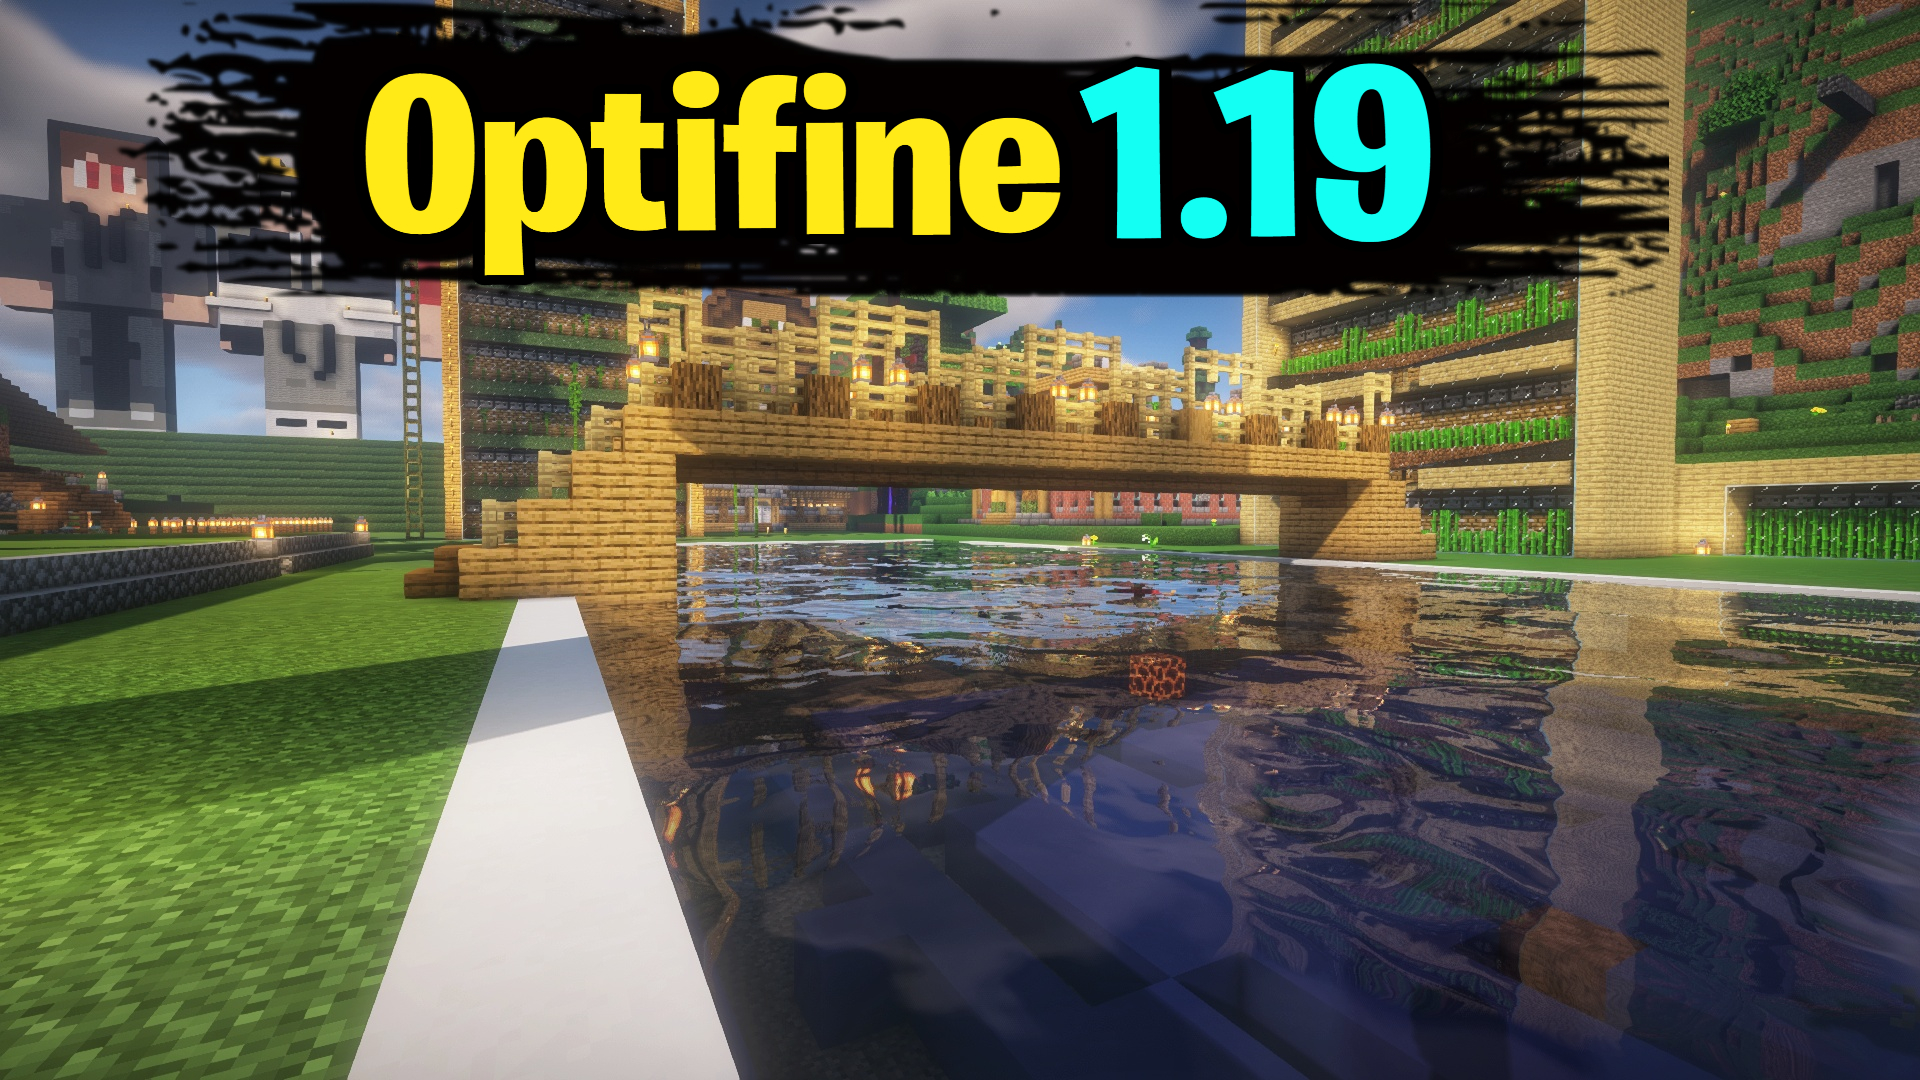 "Optifine 1.19: Installing Optifine A Step-by-Step Guide"